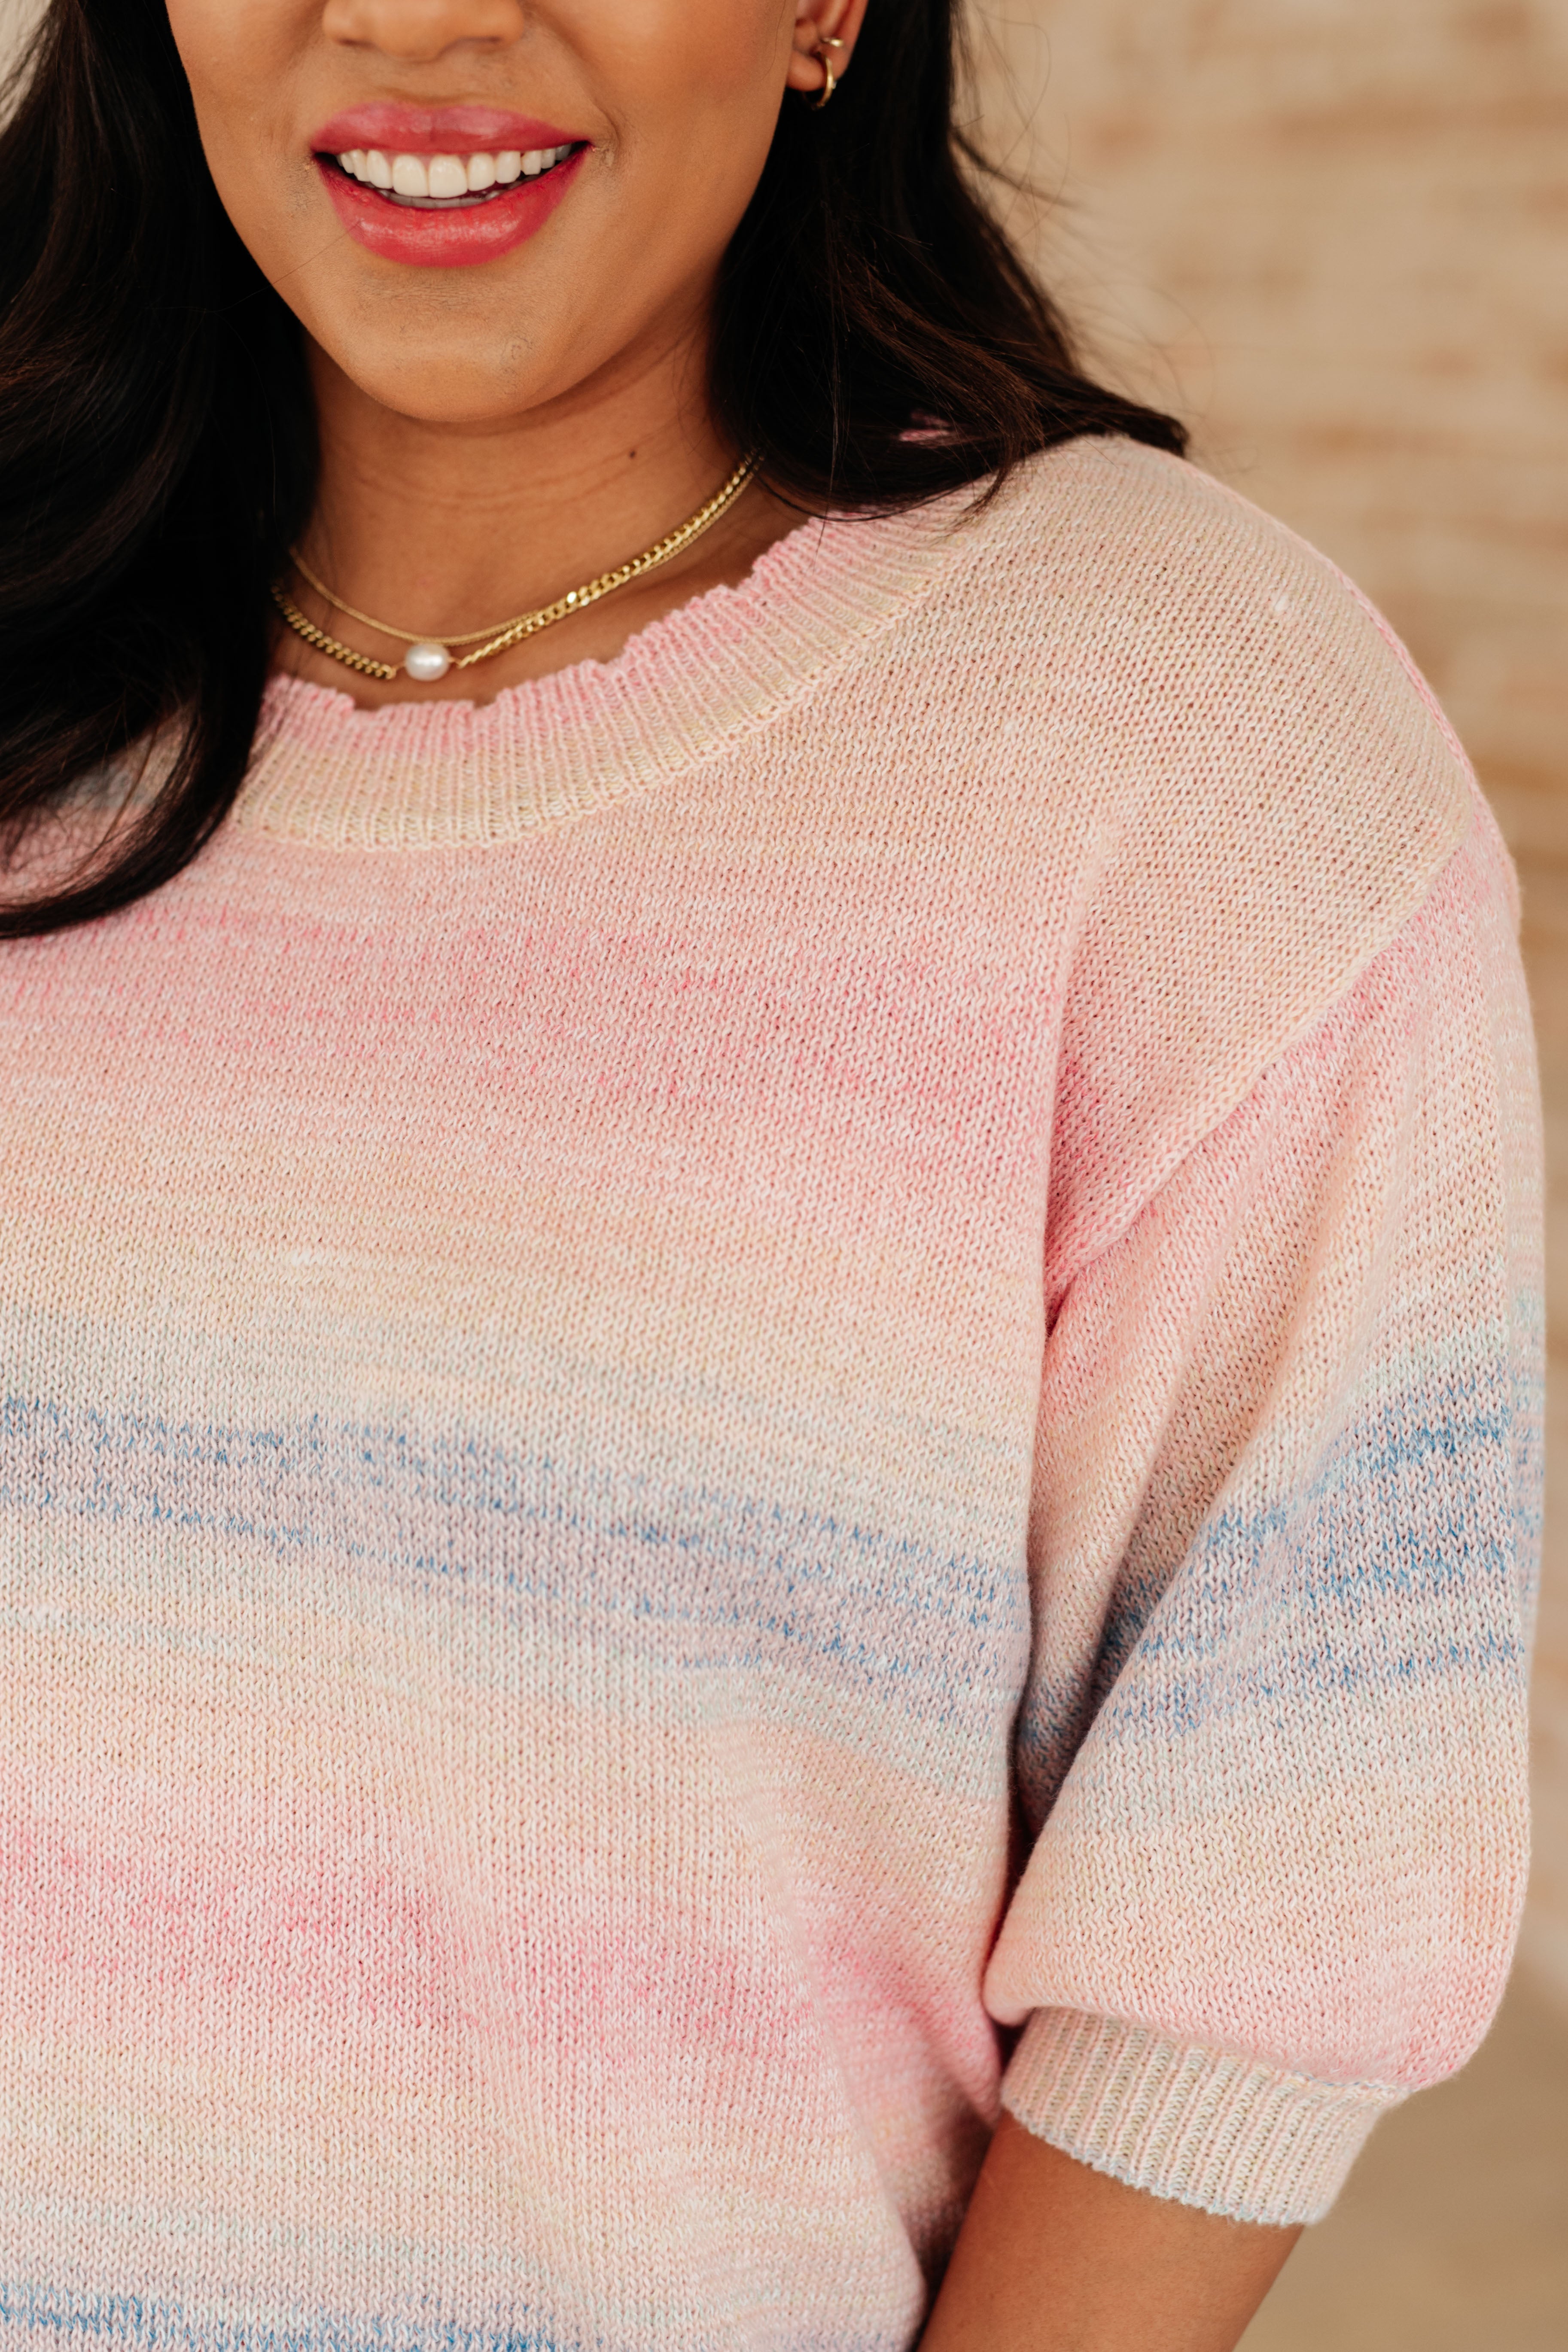 Lawrence Striped Sweater